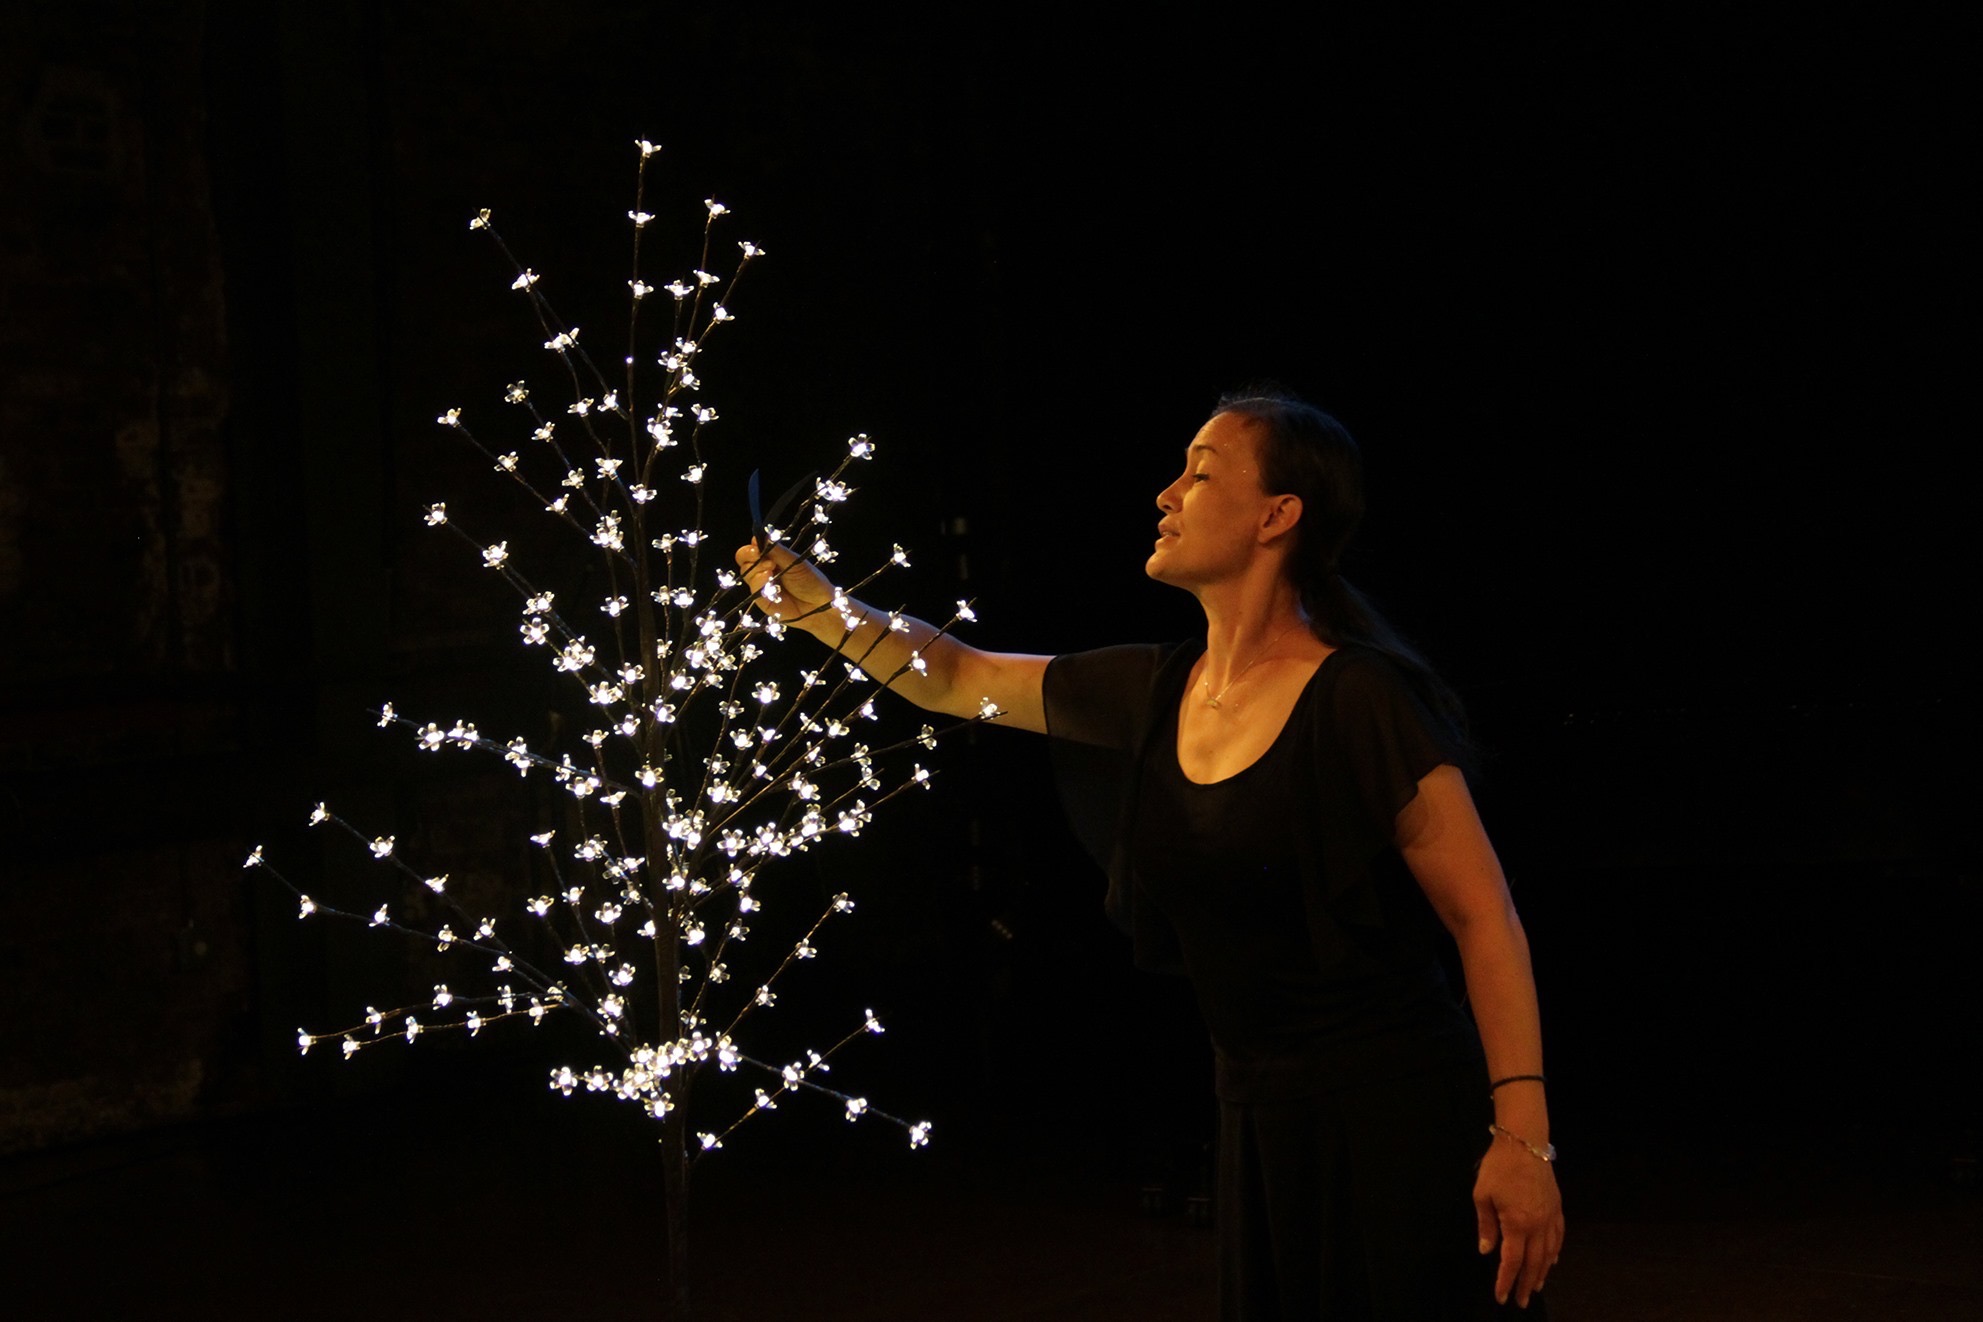 A woman of color dressed in black with a serene look on her face turns to a constellation of small white lights